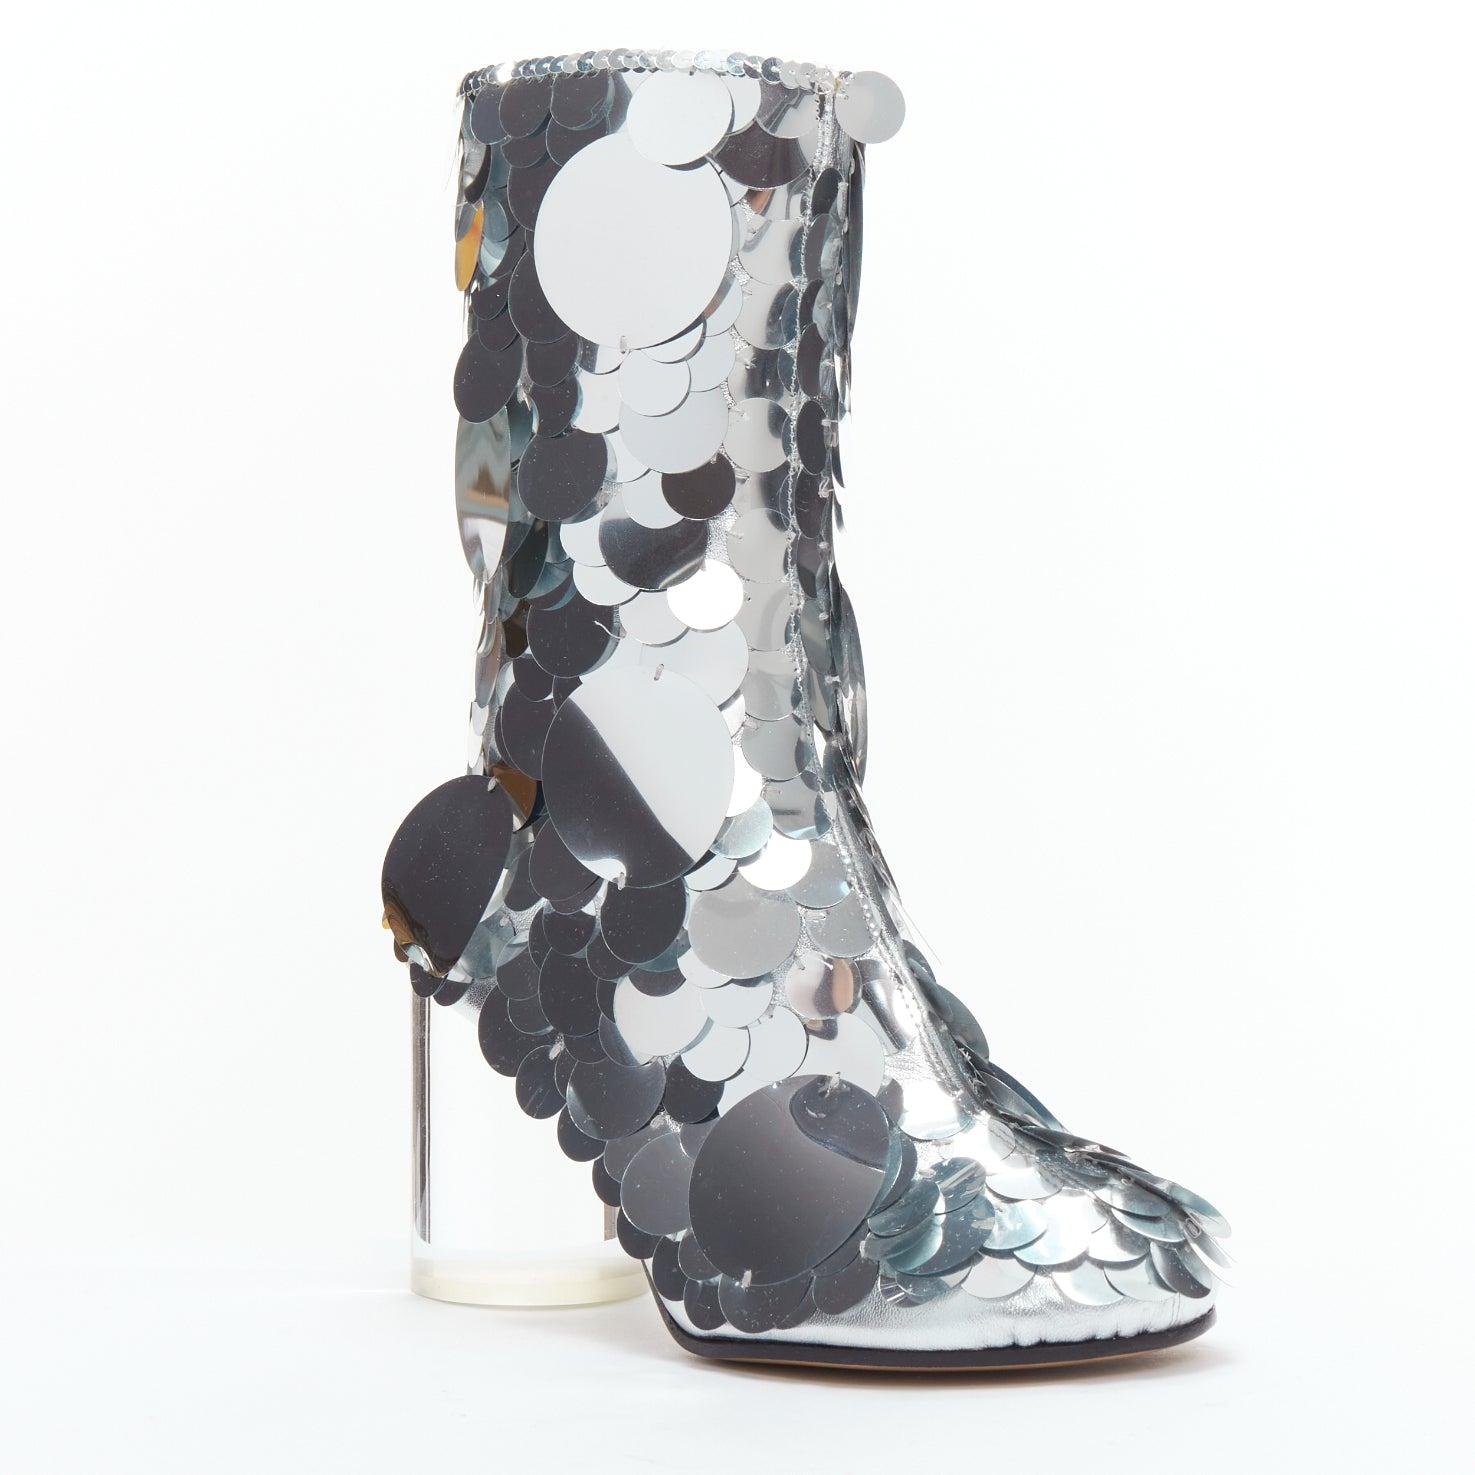 MAISON MARGIELA silver pailette clear lucite heels ankle boots EU39
Reference: BSHW/A00151
Brand: Maison Margiela
Collection: 2018
Material: Plastic, Leather, Acetate
Color: Silver, Clear
Pattern: Sequins
Closure: Zip
Lining: Black Leather
Extra